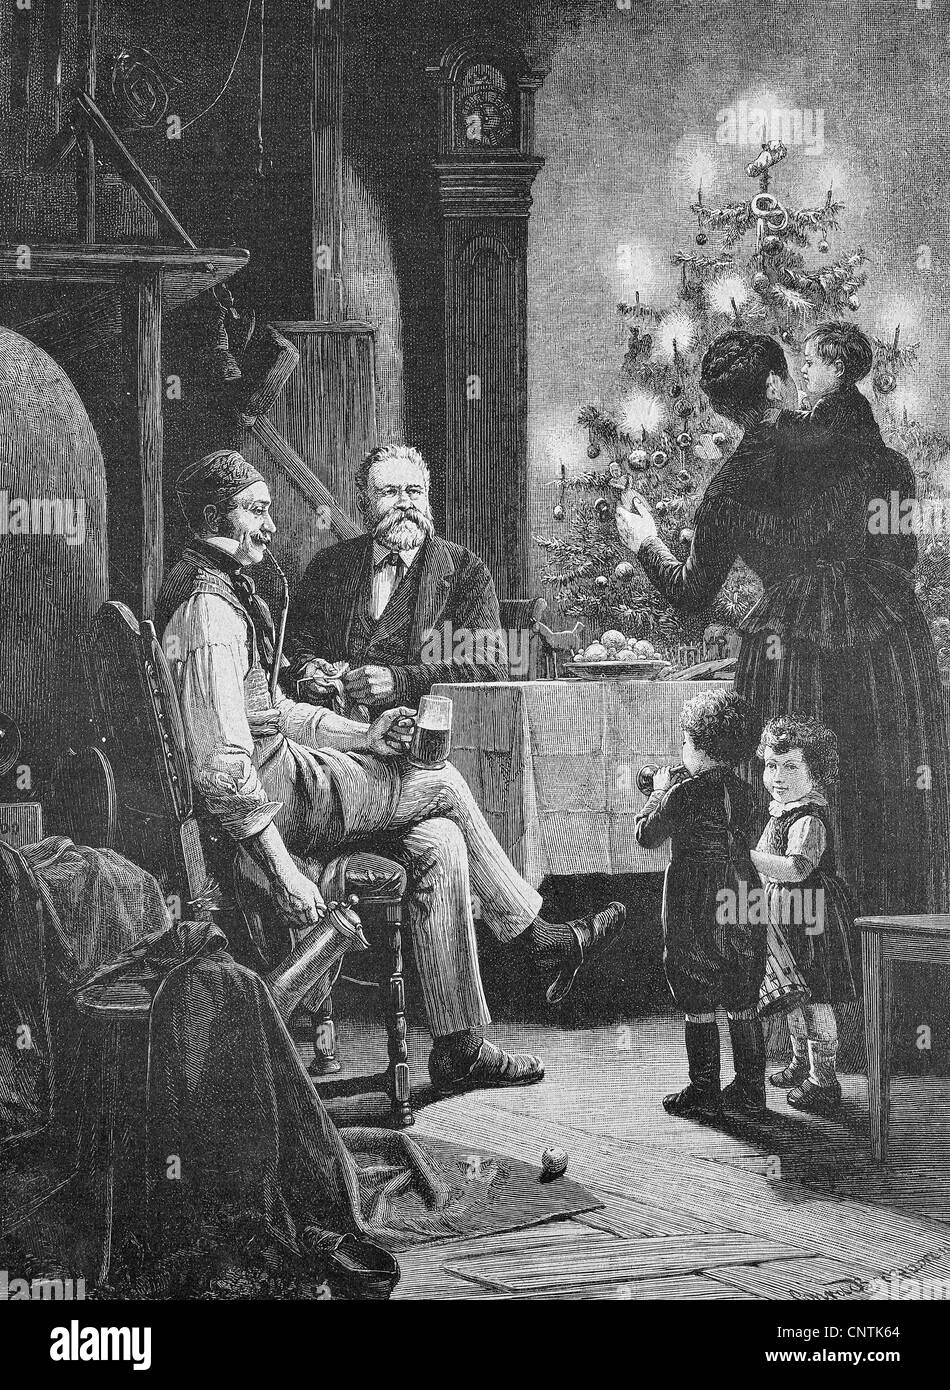 Fritz Reuter's Christmas, Christian Friedrich Ludwig Heinrich Reuter, 1810-1874, one of the most important German poets and writ Stock Photo